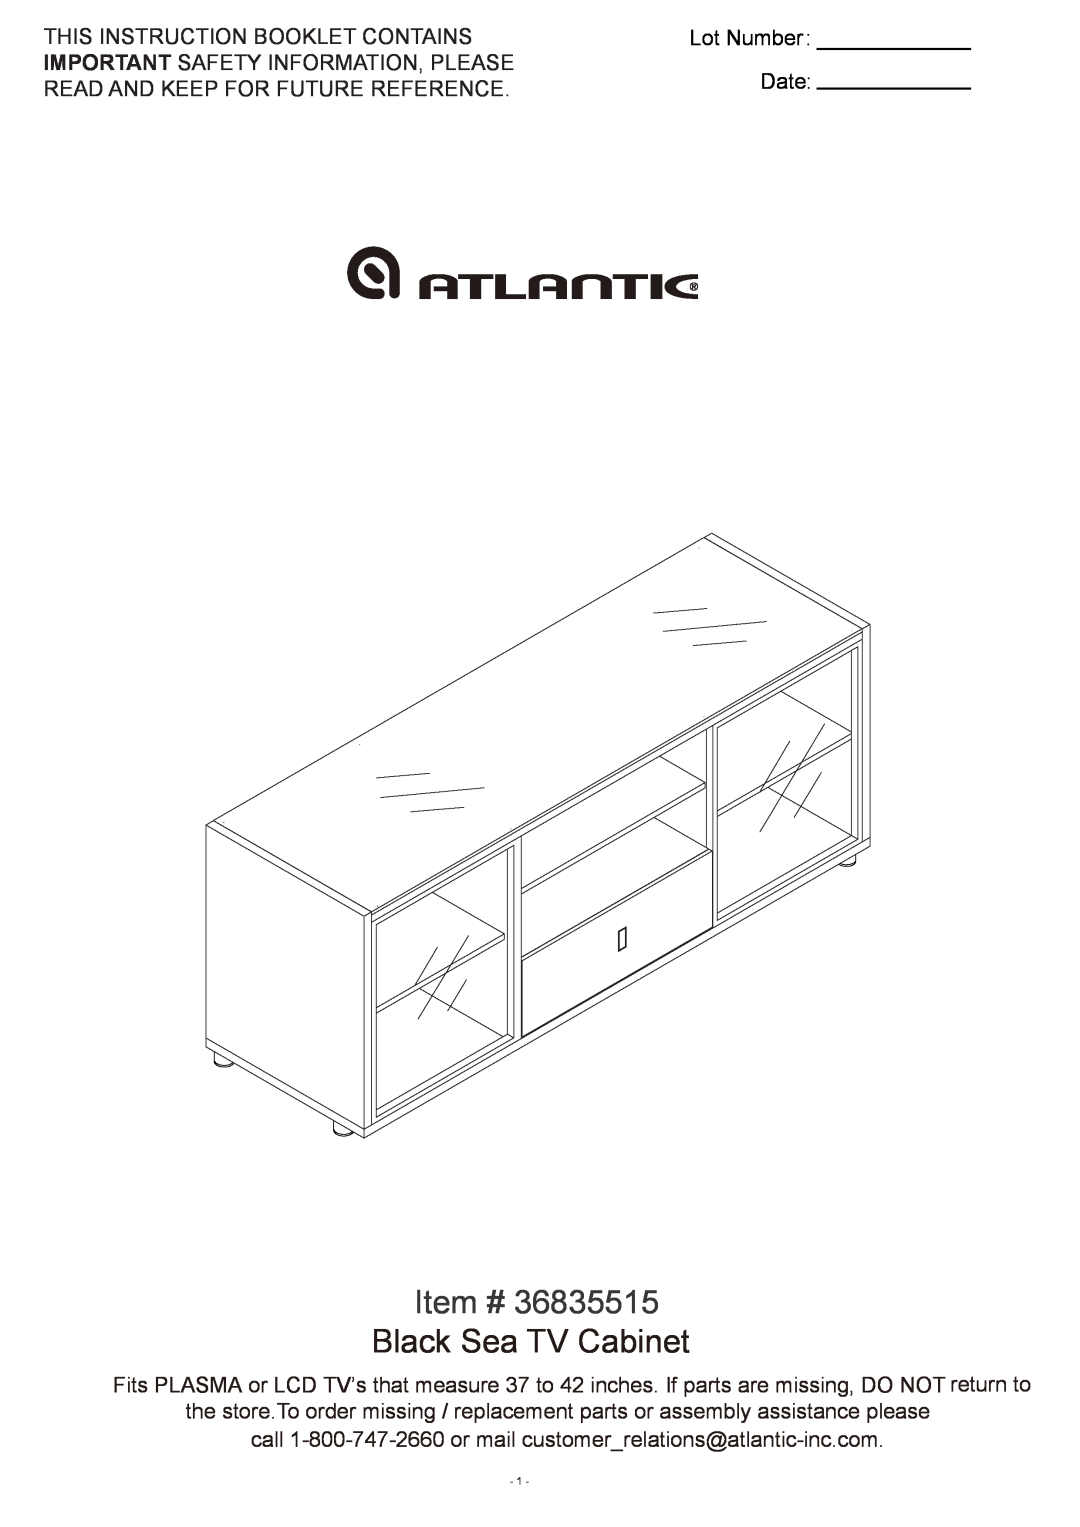 Atlantic 36835515 manual Item #, Black Sea TV Cabinet, This Instruction Booklet Contains, Lot Number, Date 